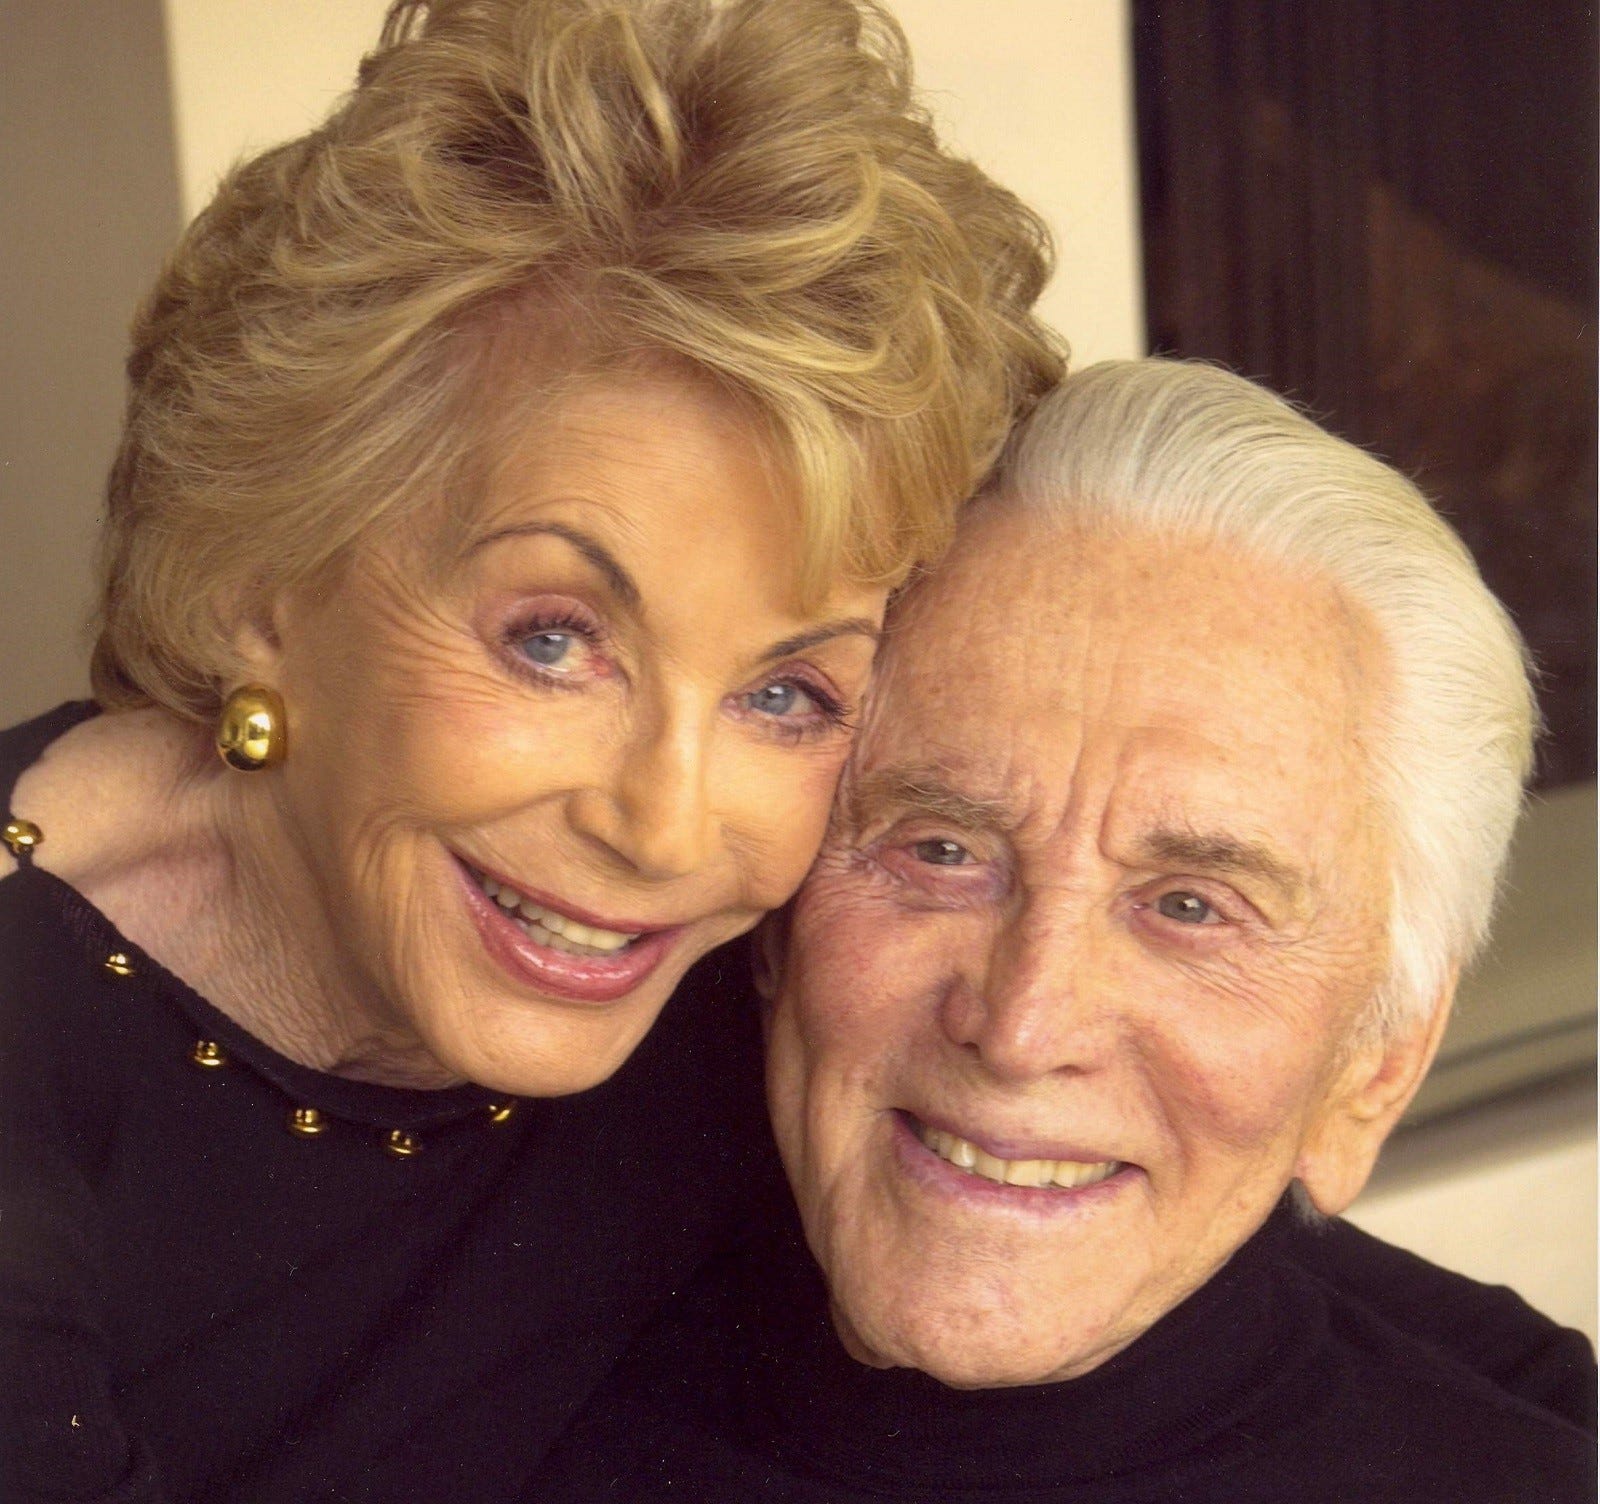 Kirk and Anne Douglas, 202 years old combined, celebrate 65 years of marriage6 日前